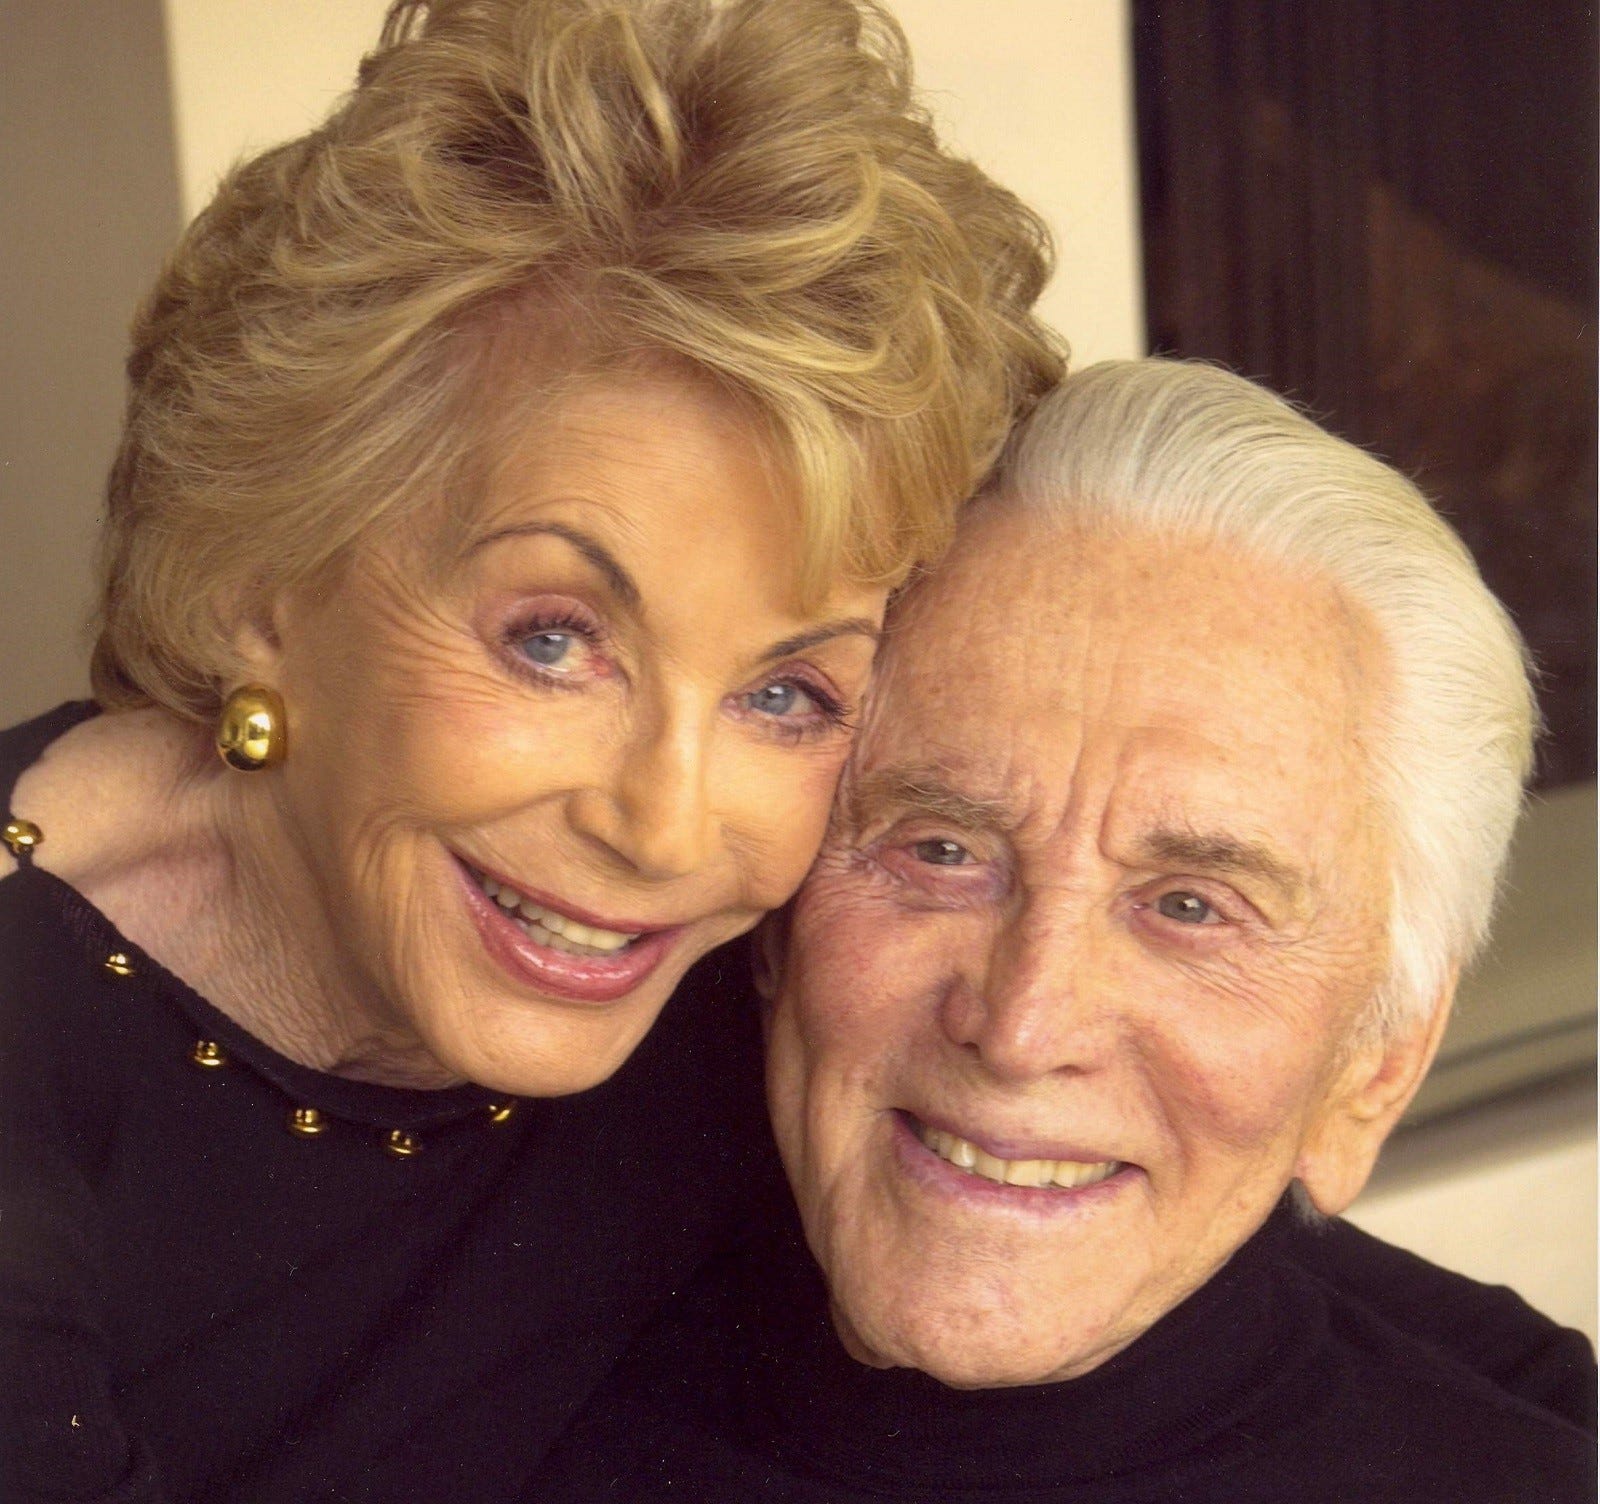 Kirk and Anne Douglas, 202 years old combined, celebrate 65 years of marriage6 日前